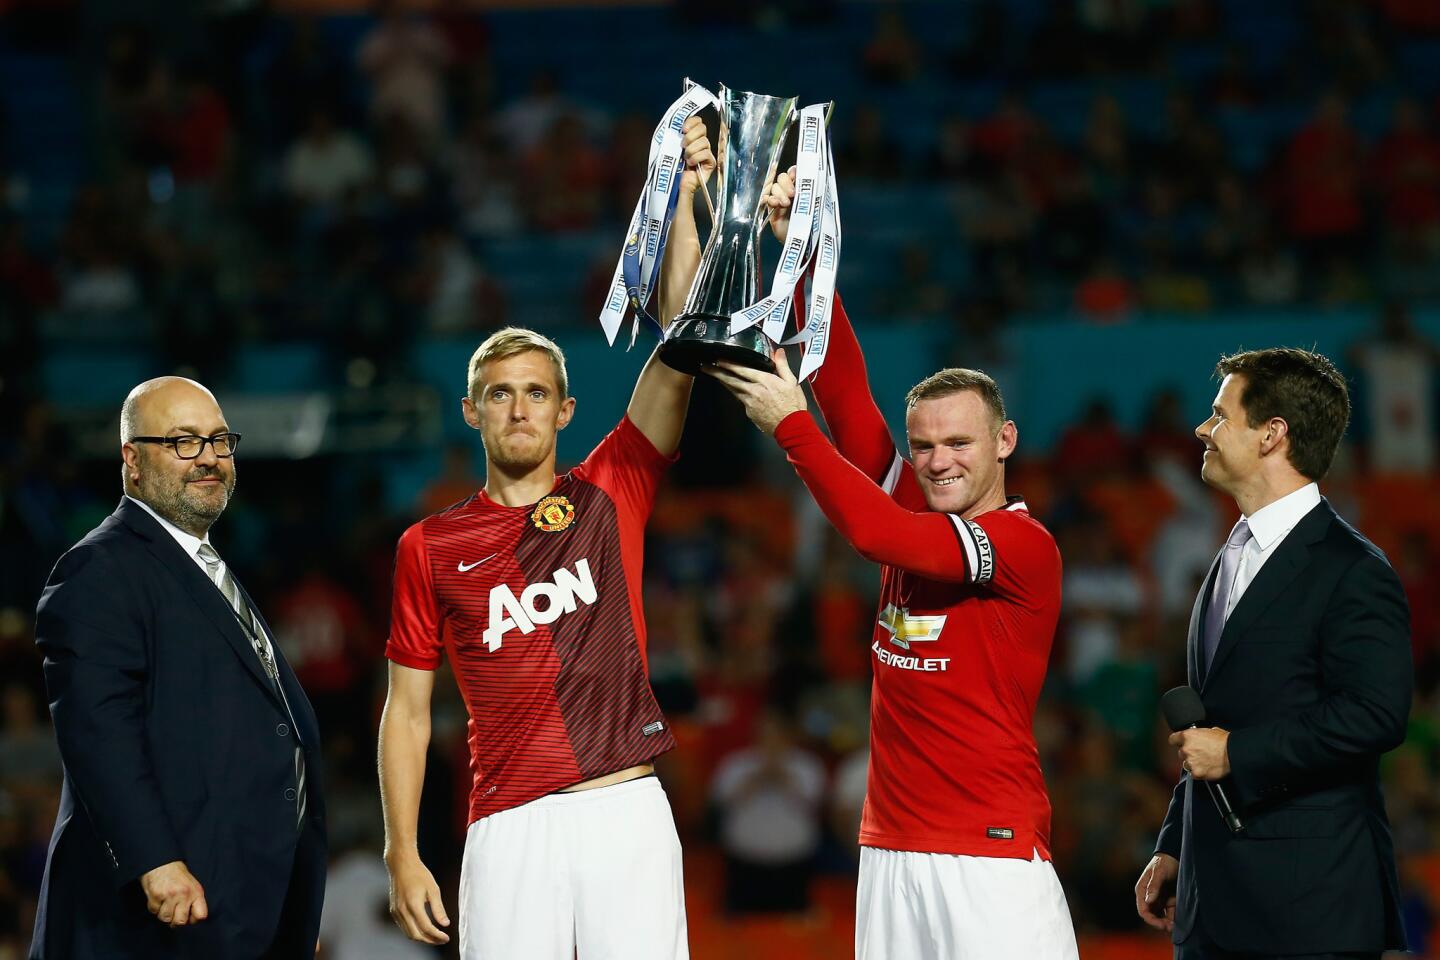 MIAMI GARDENS, FL - AUGUST 04: (L) Darren Fletcher #24 of Manchester United and (R) Wayne Rooney #10 of Manchester United lift the trophy following their 3-1 vicotory over Liverpool in the Guinness International Champions Cup 2014 Final at Sun Life Stadium on August 4, 2014 in Miami Gardens, Florida. (Photo by Chris Trotman/Getty Images) ORG XMIT: 479915401